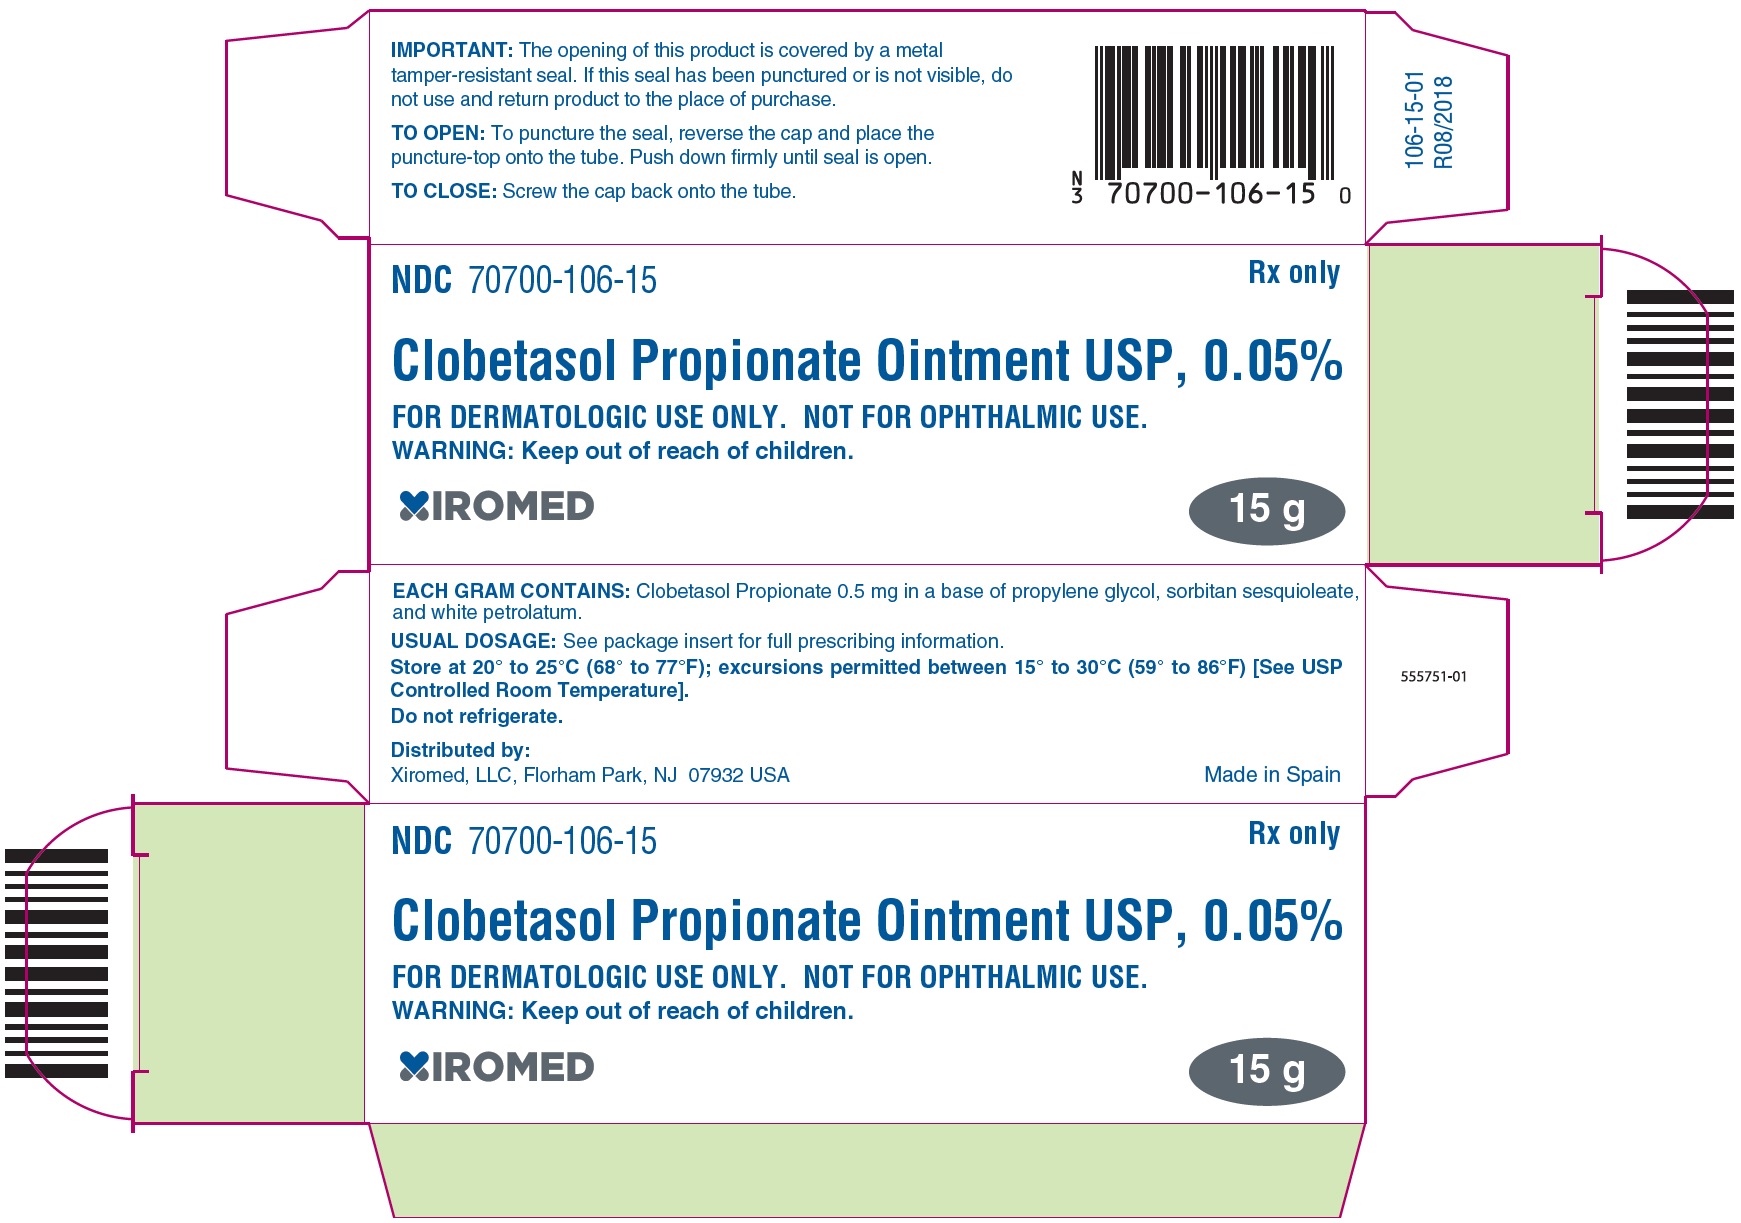 Rx Item-Clobetasol Propionate 0.05% 15 GM Ointment by Xiromed Gen Temovate